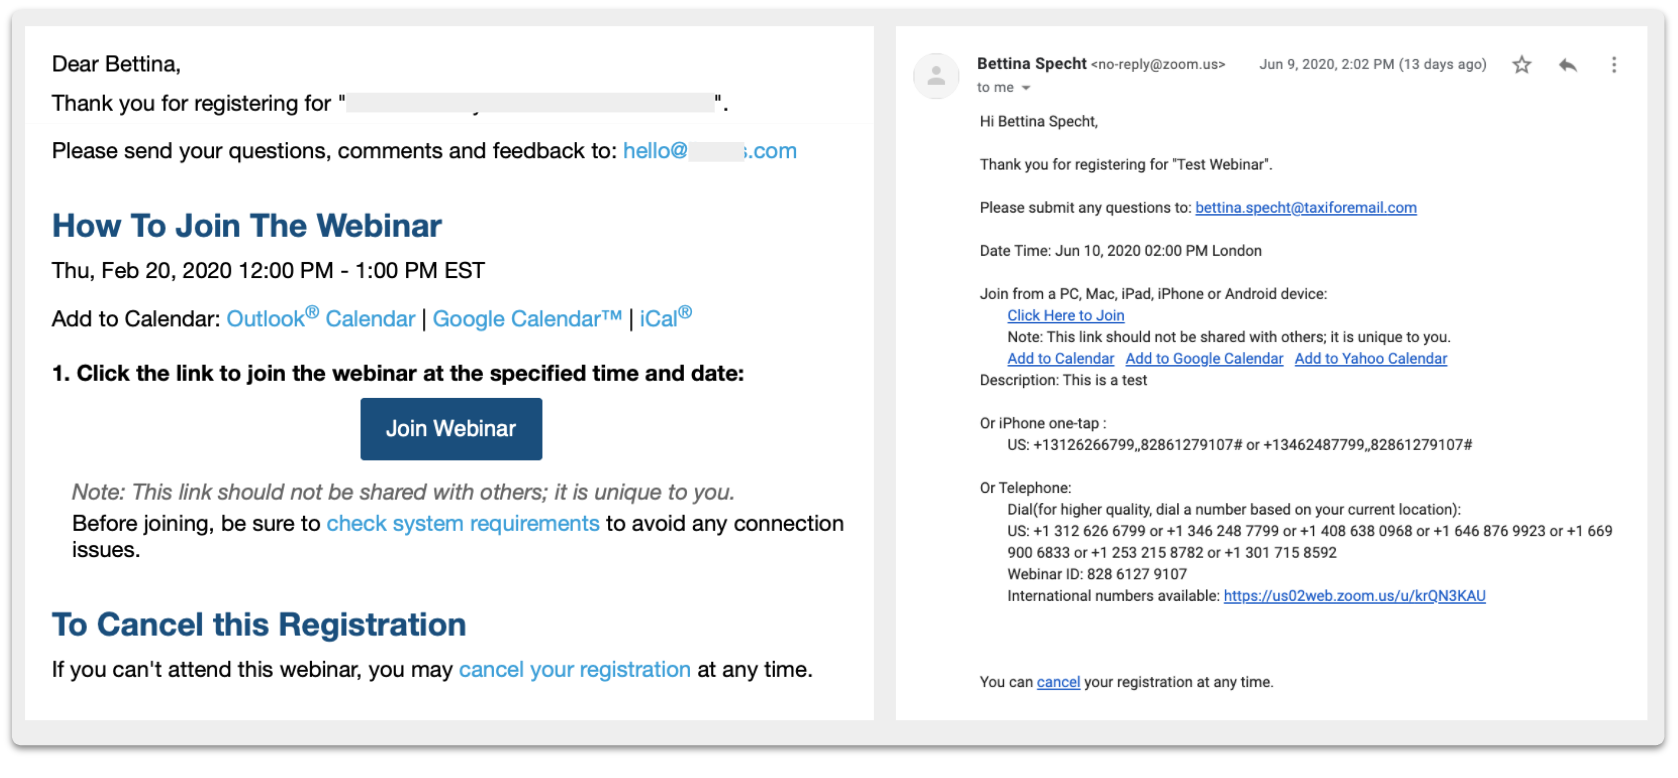 webinar-email-examples.png#asset:1945